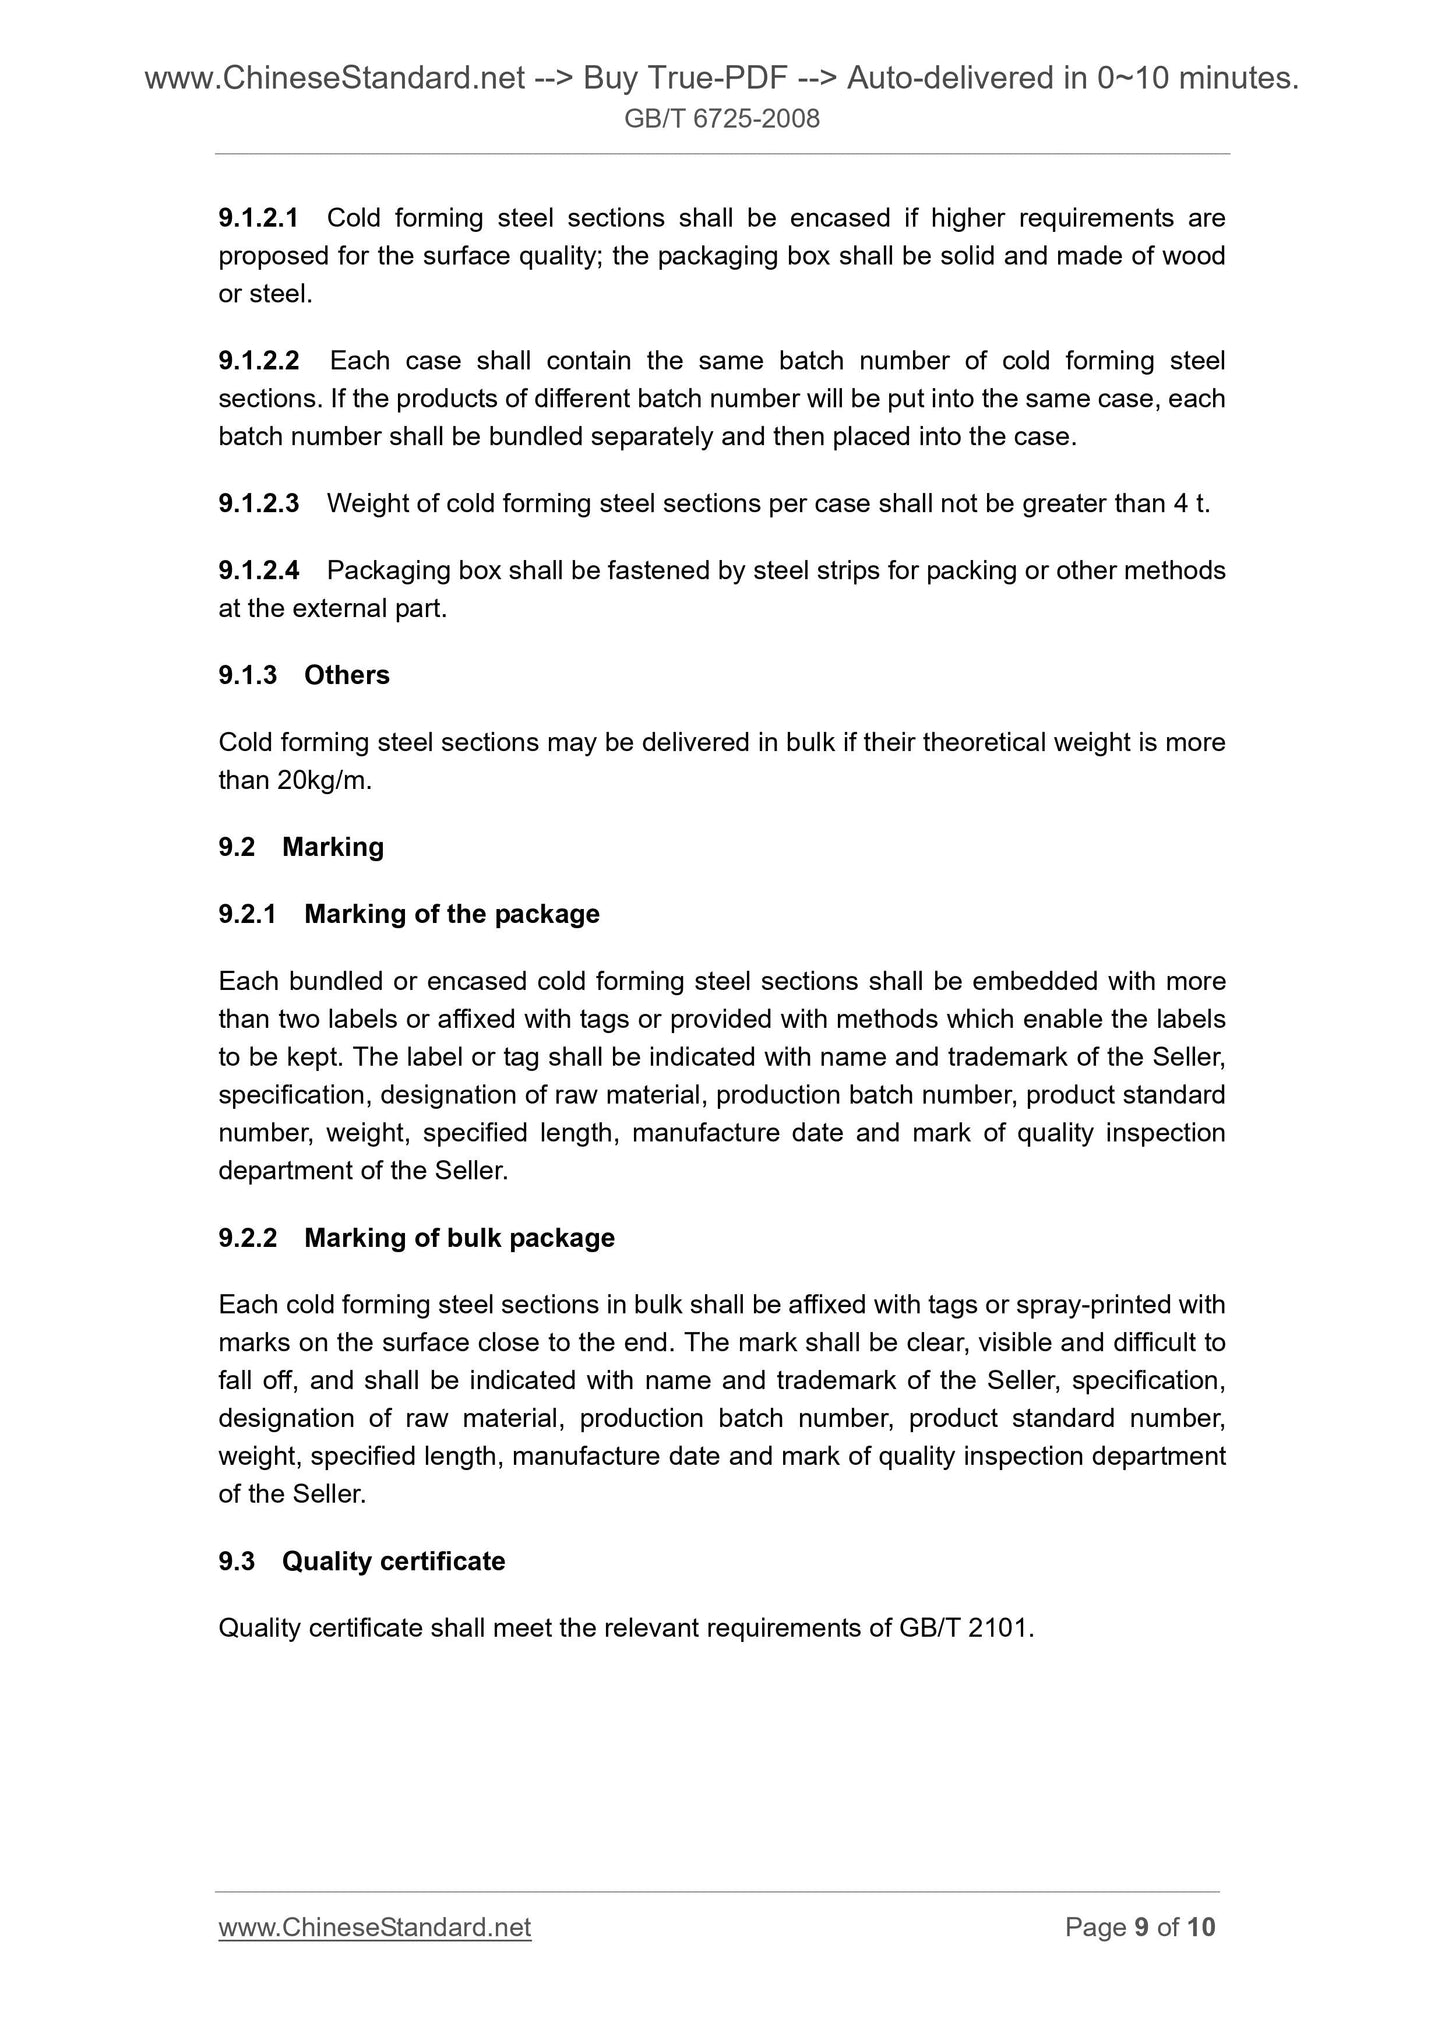 GB/T 6725-2008 Page 7